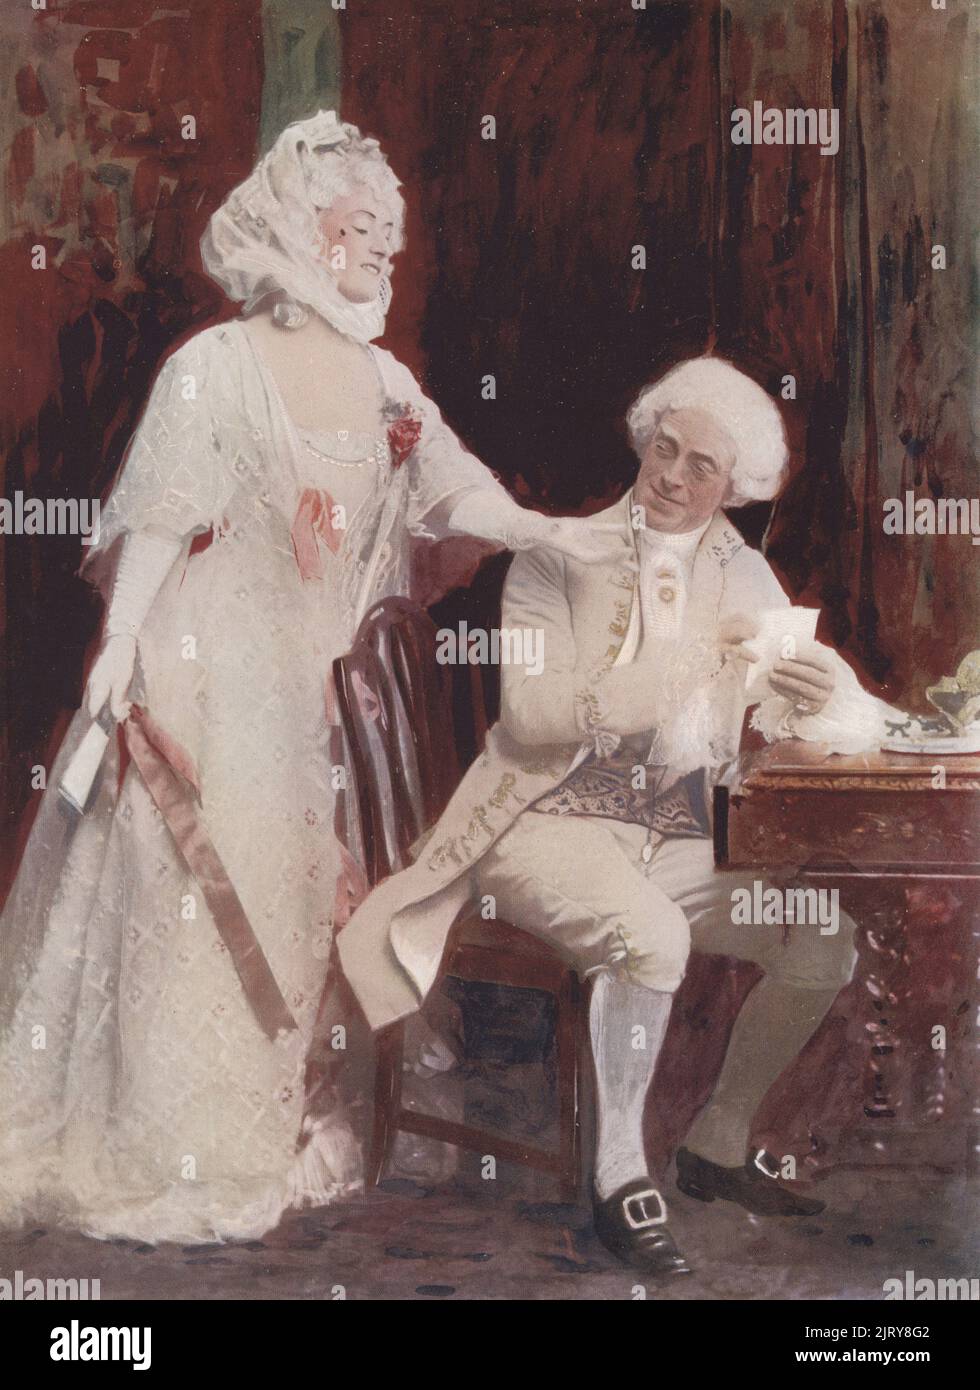 Winifred Emery and Cyril Maude in The School for Scandal, comedy by Richard Sheridan, Vaudeville Theatre, 1890.sca Cyril Maude, English actor manager, 1862-1951. Performing with his wife Maud Isabel Emery, English actress and actor manager, 1861-1924. Photograph by Window and Grove (Frederick Richard Window and William Henry Grove). Colour printing of a hand-coloured illustration based on a monochrome photograph from George Newnes’s Players of the Day, London, 1905. Stock Photo